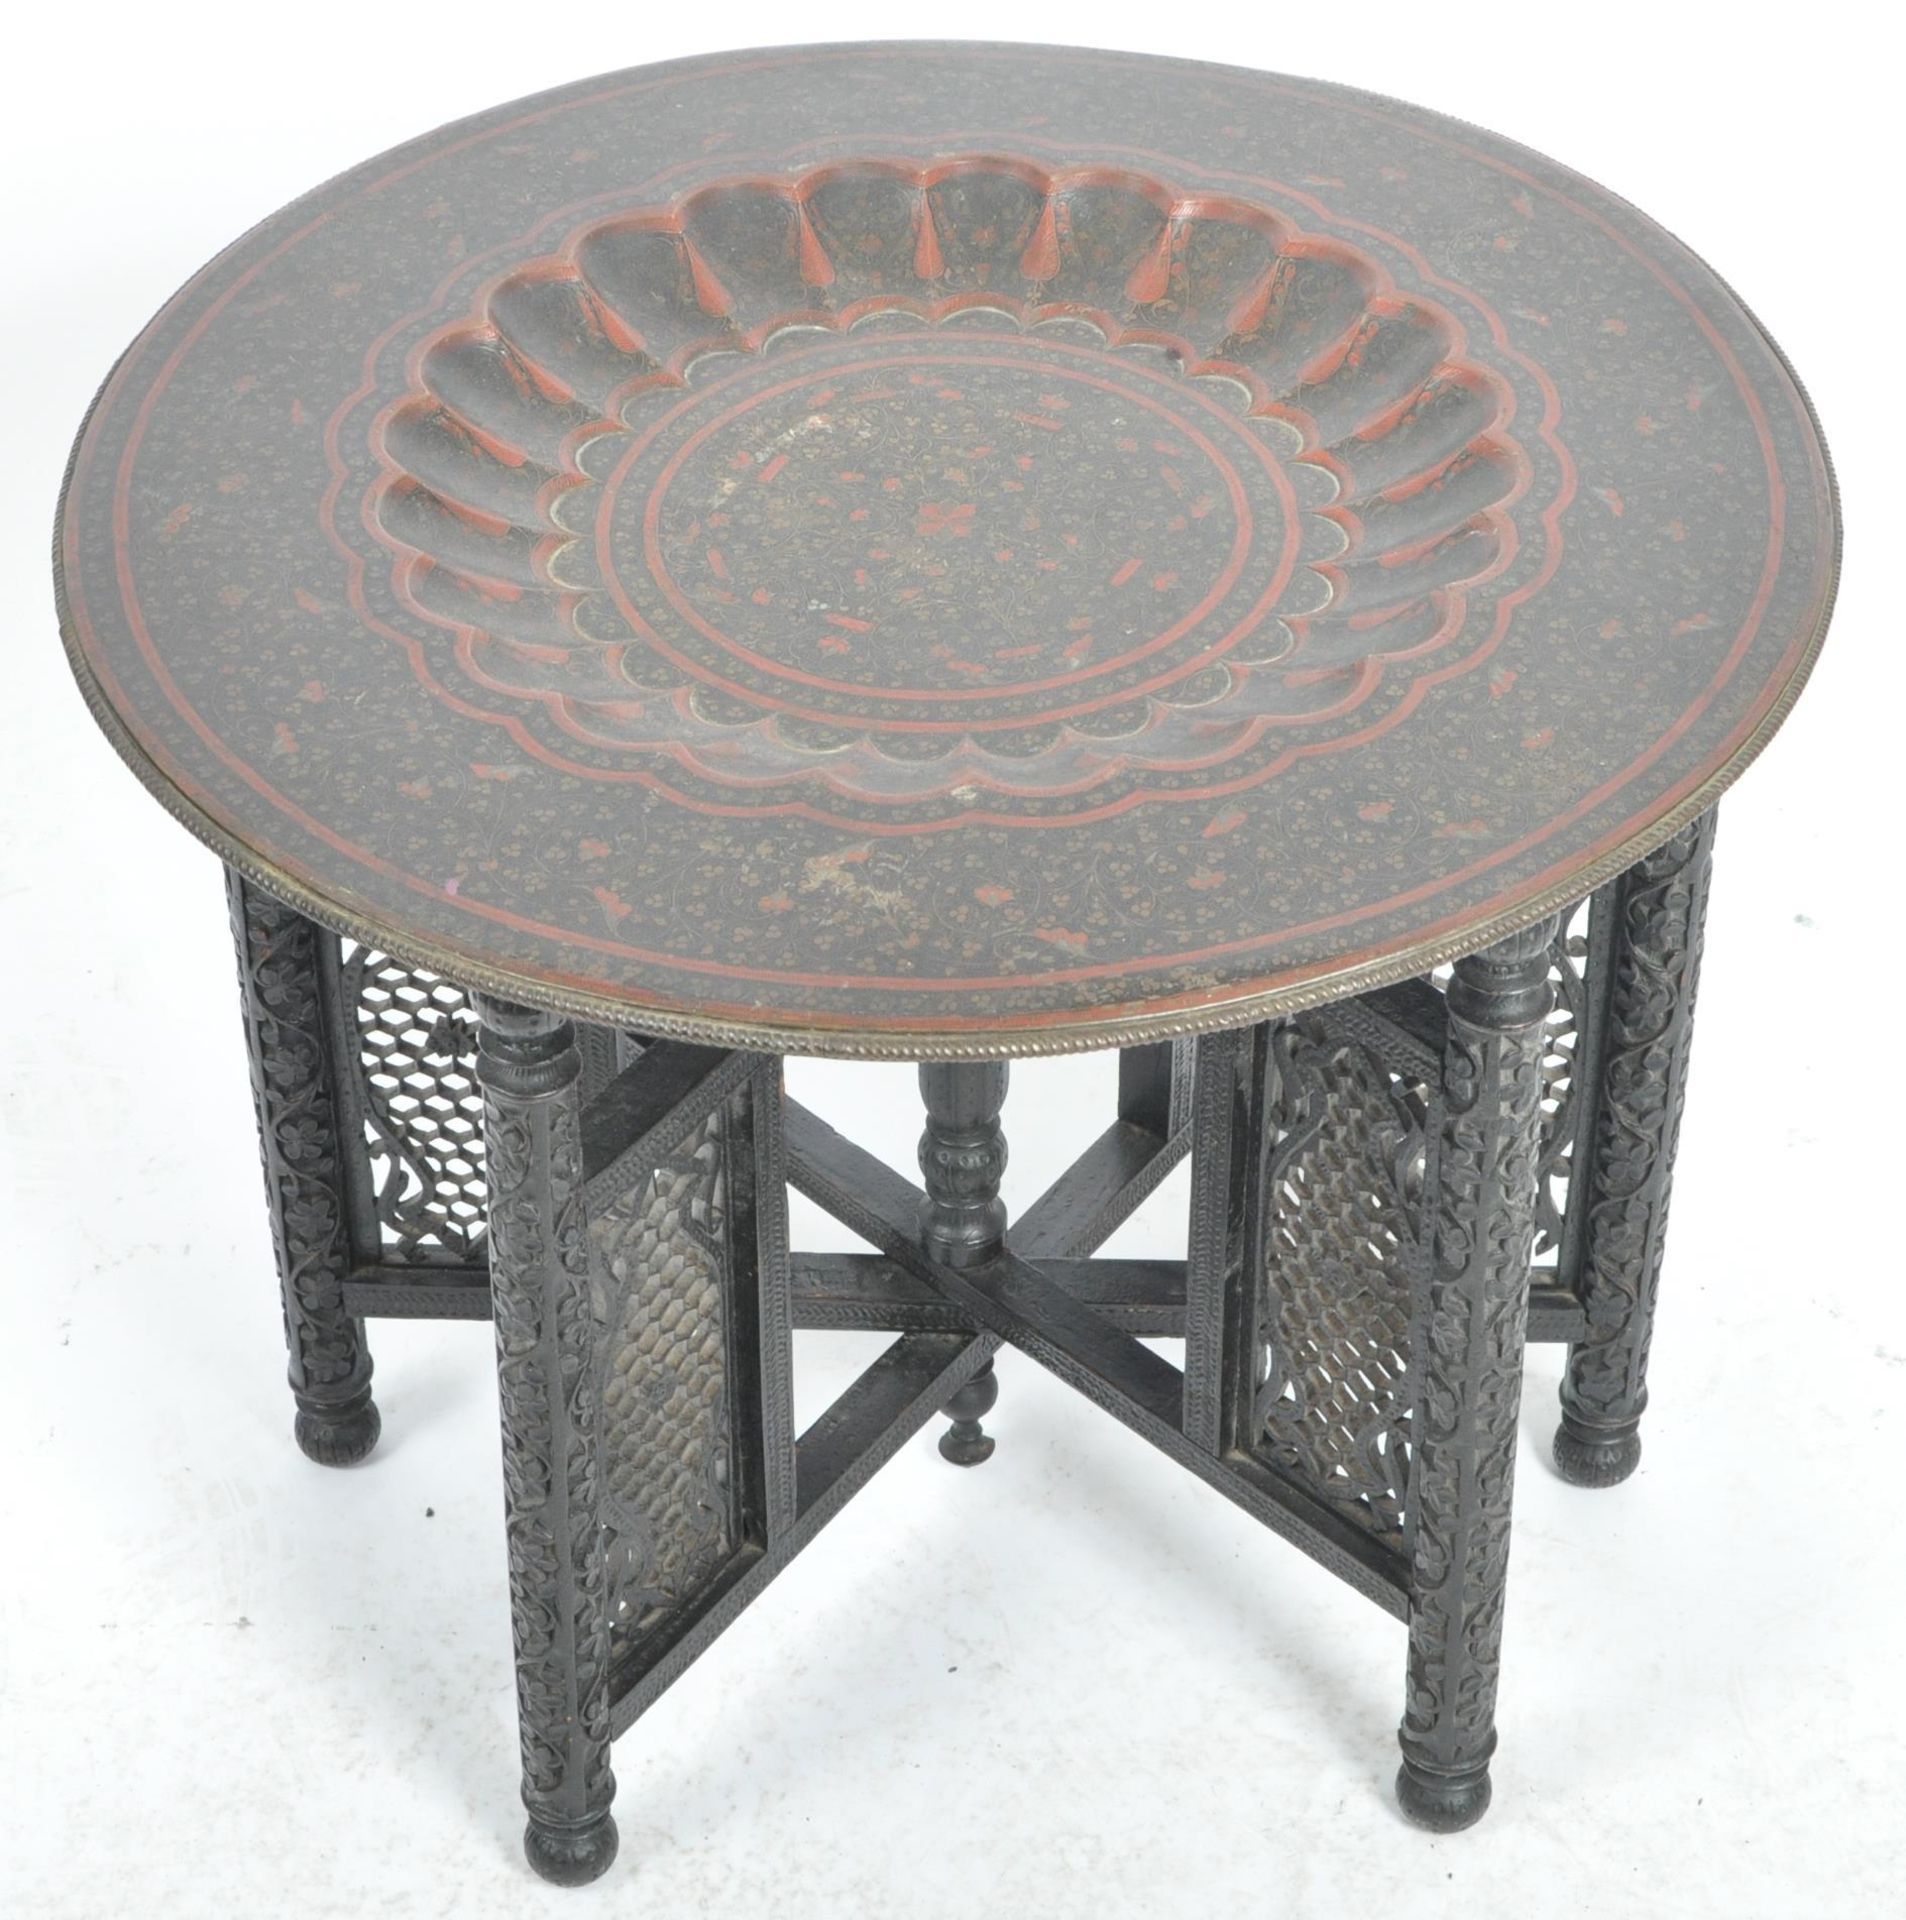 19TH CENTURY ANGLO COLONIAL BRASS BENARES TABLE - Image 2 of 7